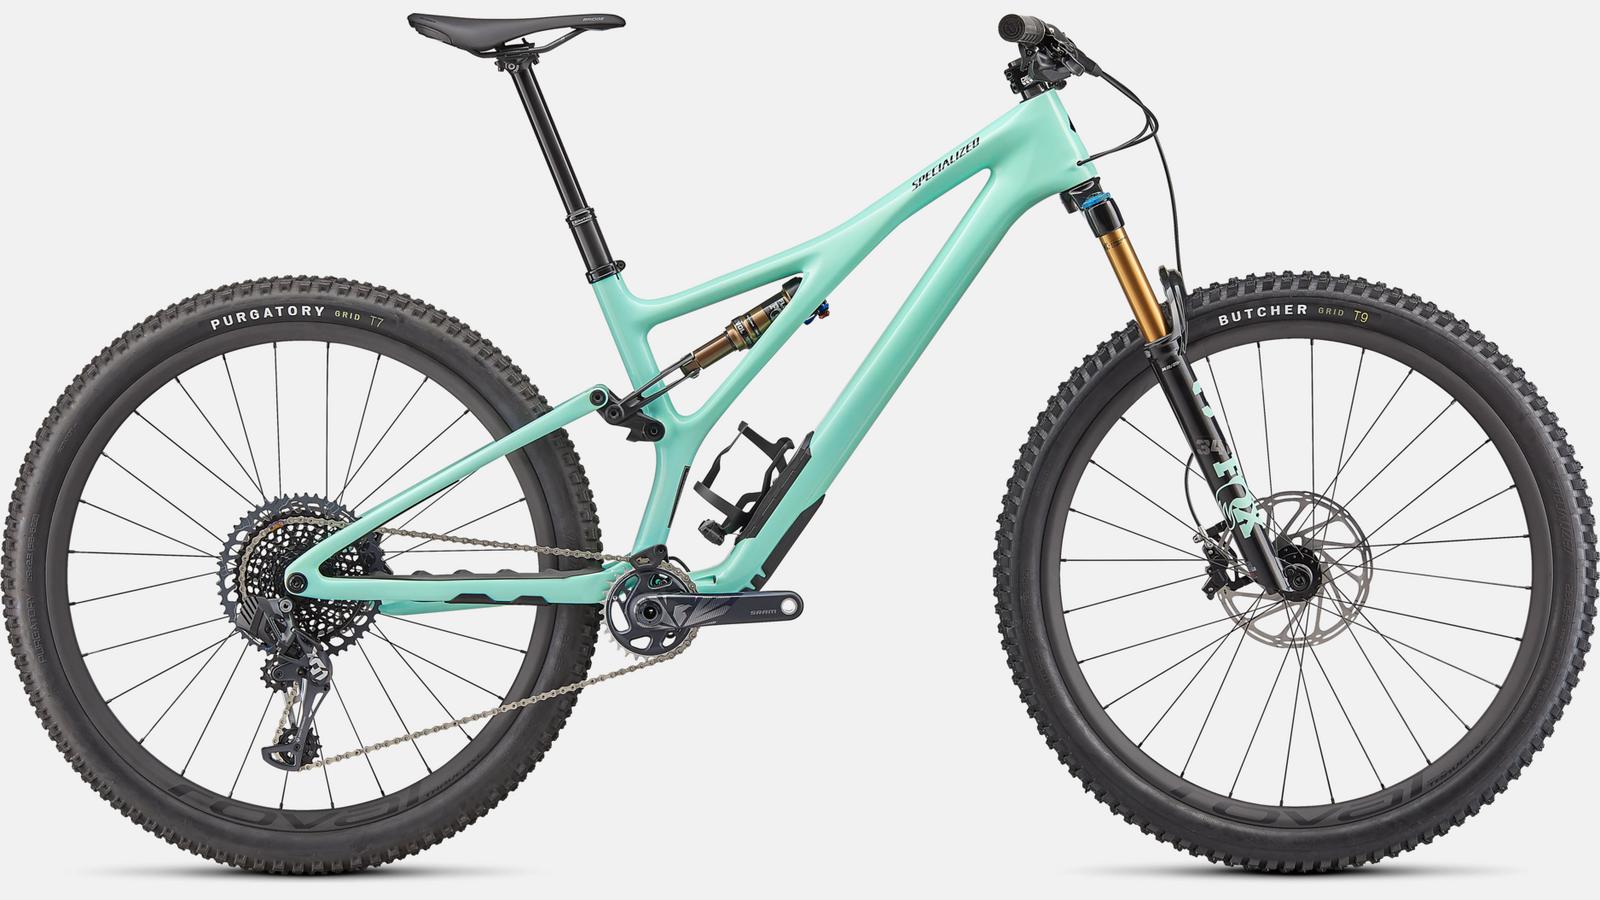 Paint for 2022 Specialized Stumpjumper Pro - Gloss Oasis